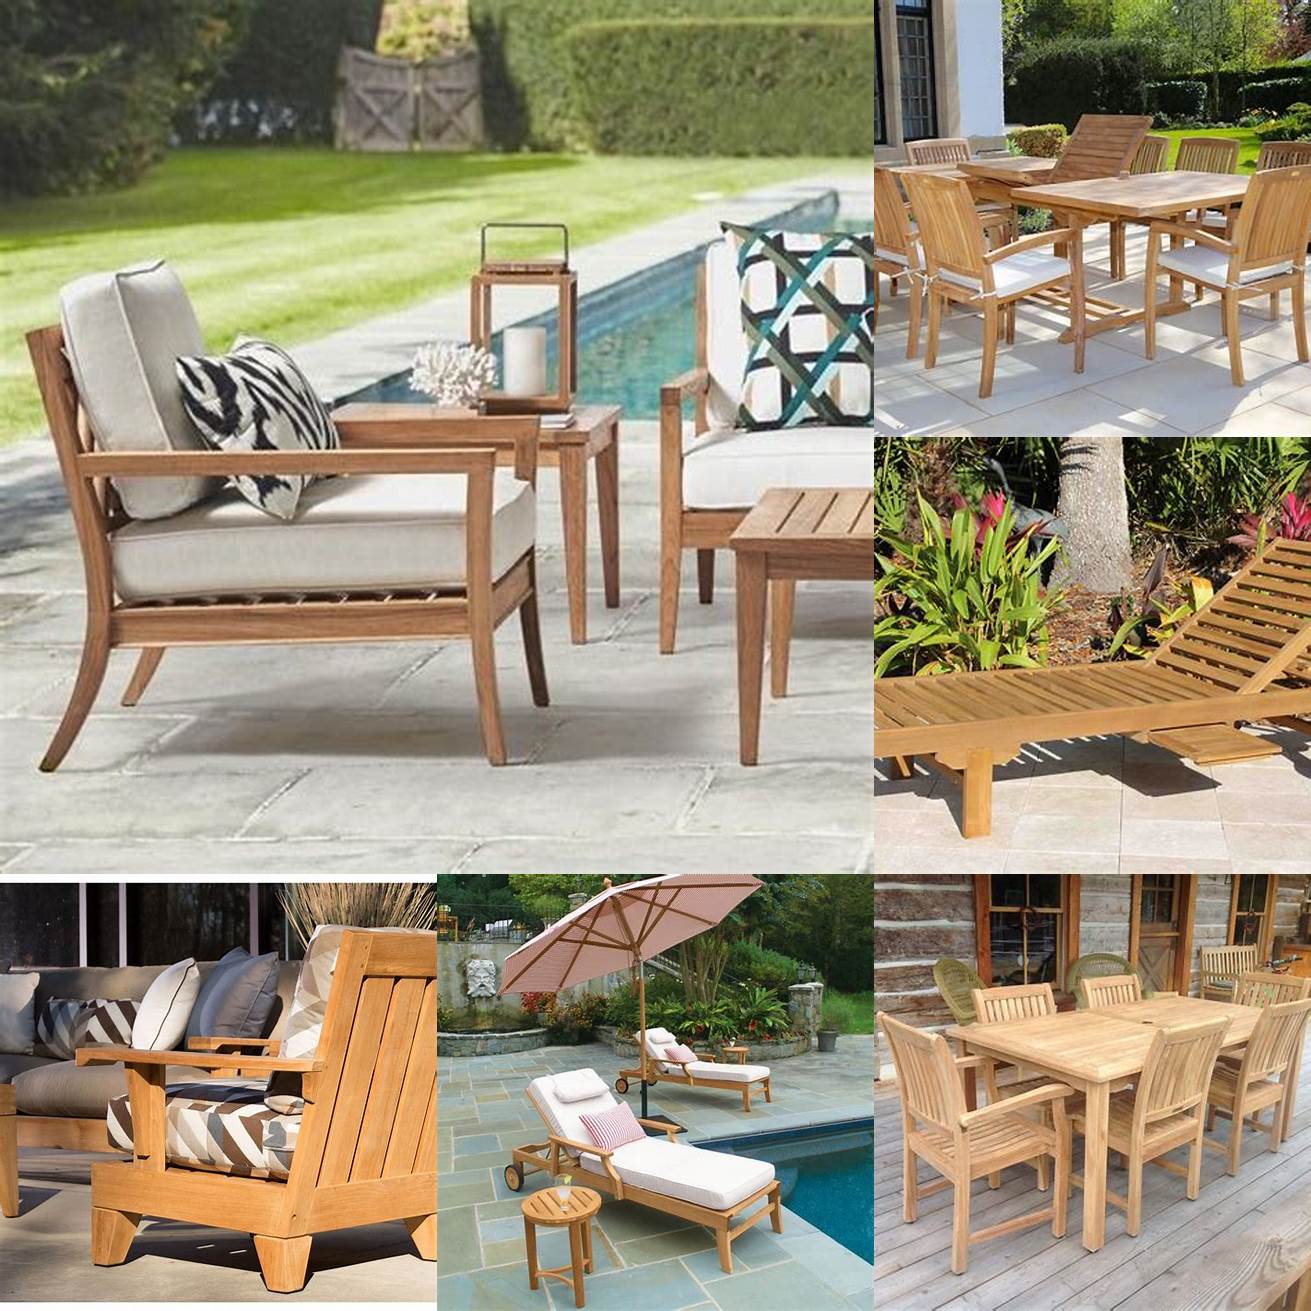 Teak Furniture With UV Protection